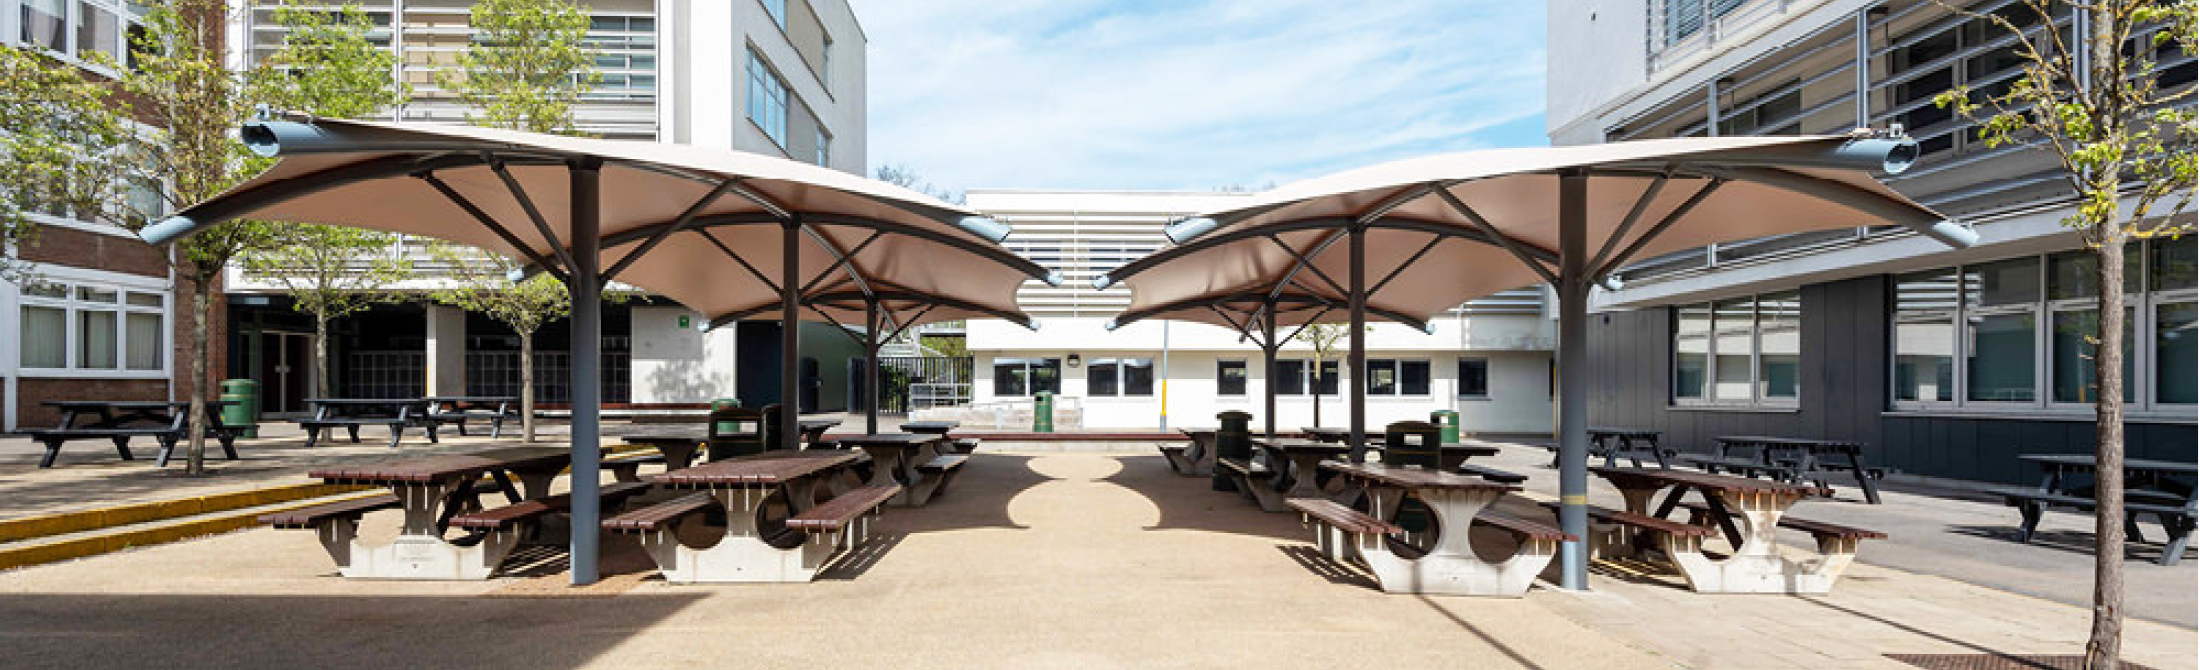 School Canopies - ORION Shield Canopy